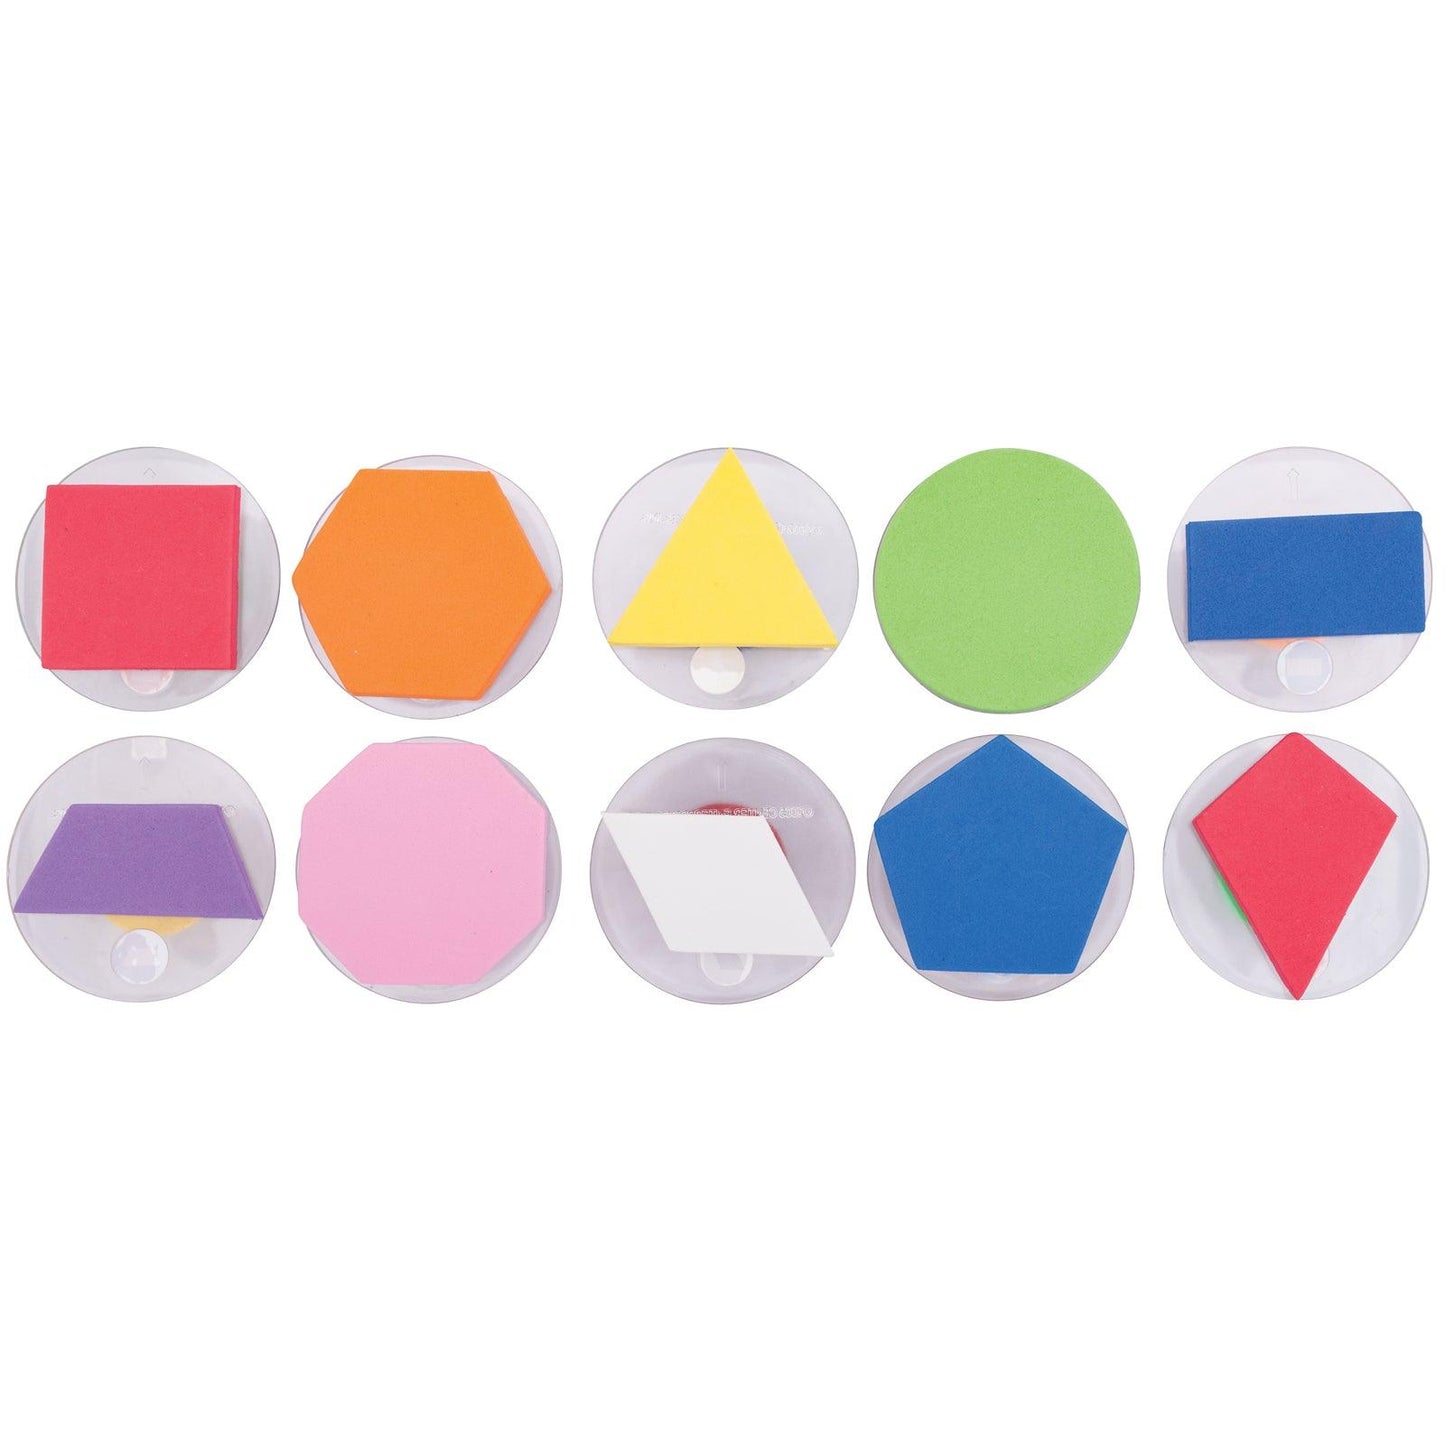 Giant Stampers - Geometric Shapes - Filled In - Set of 10 - Loomini